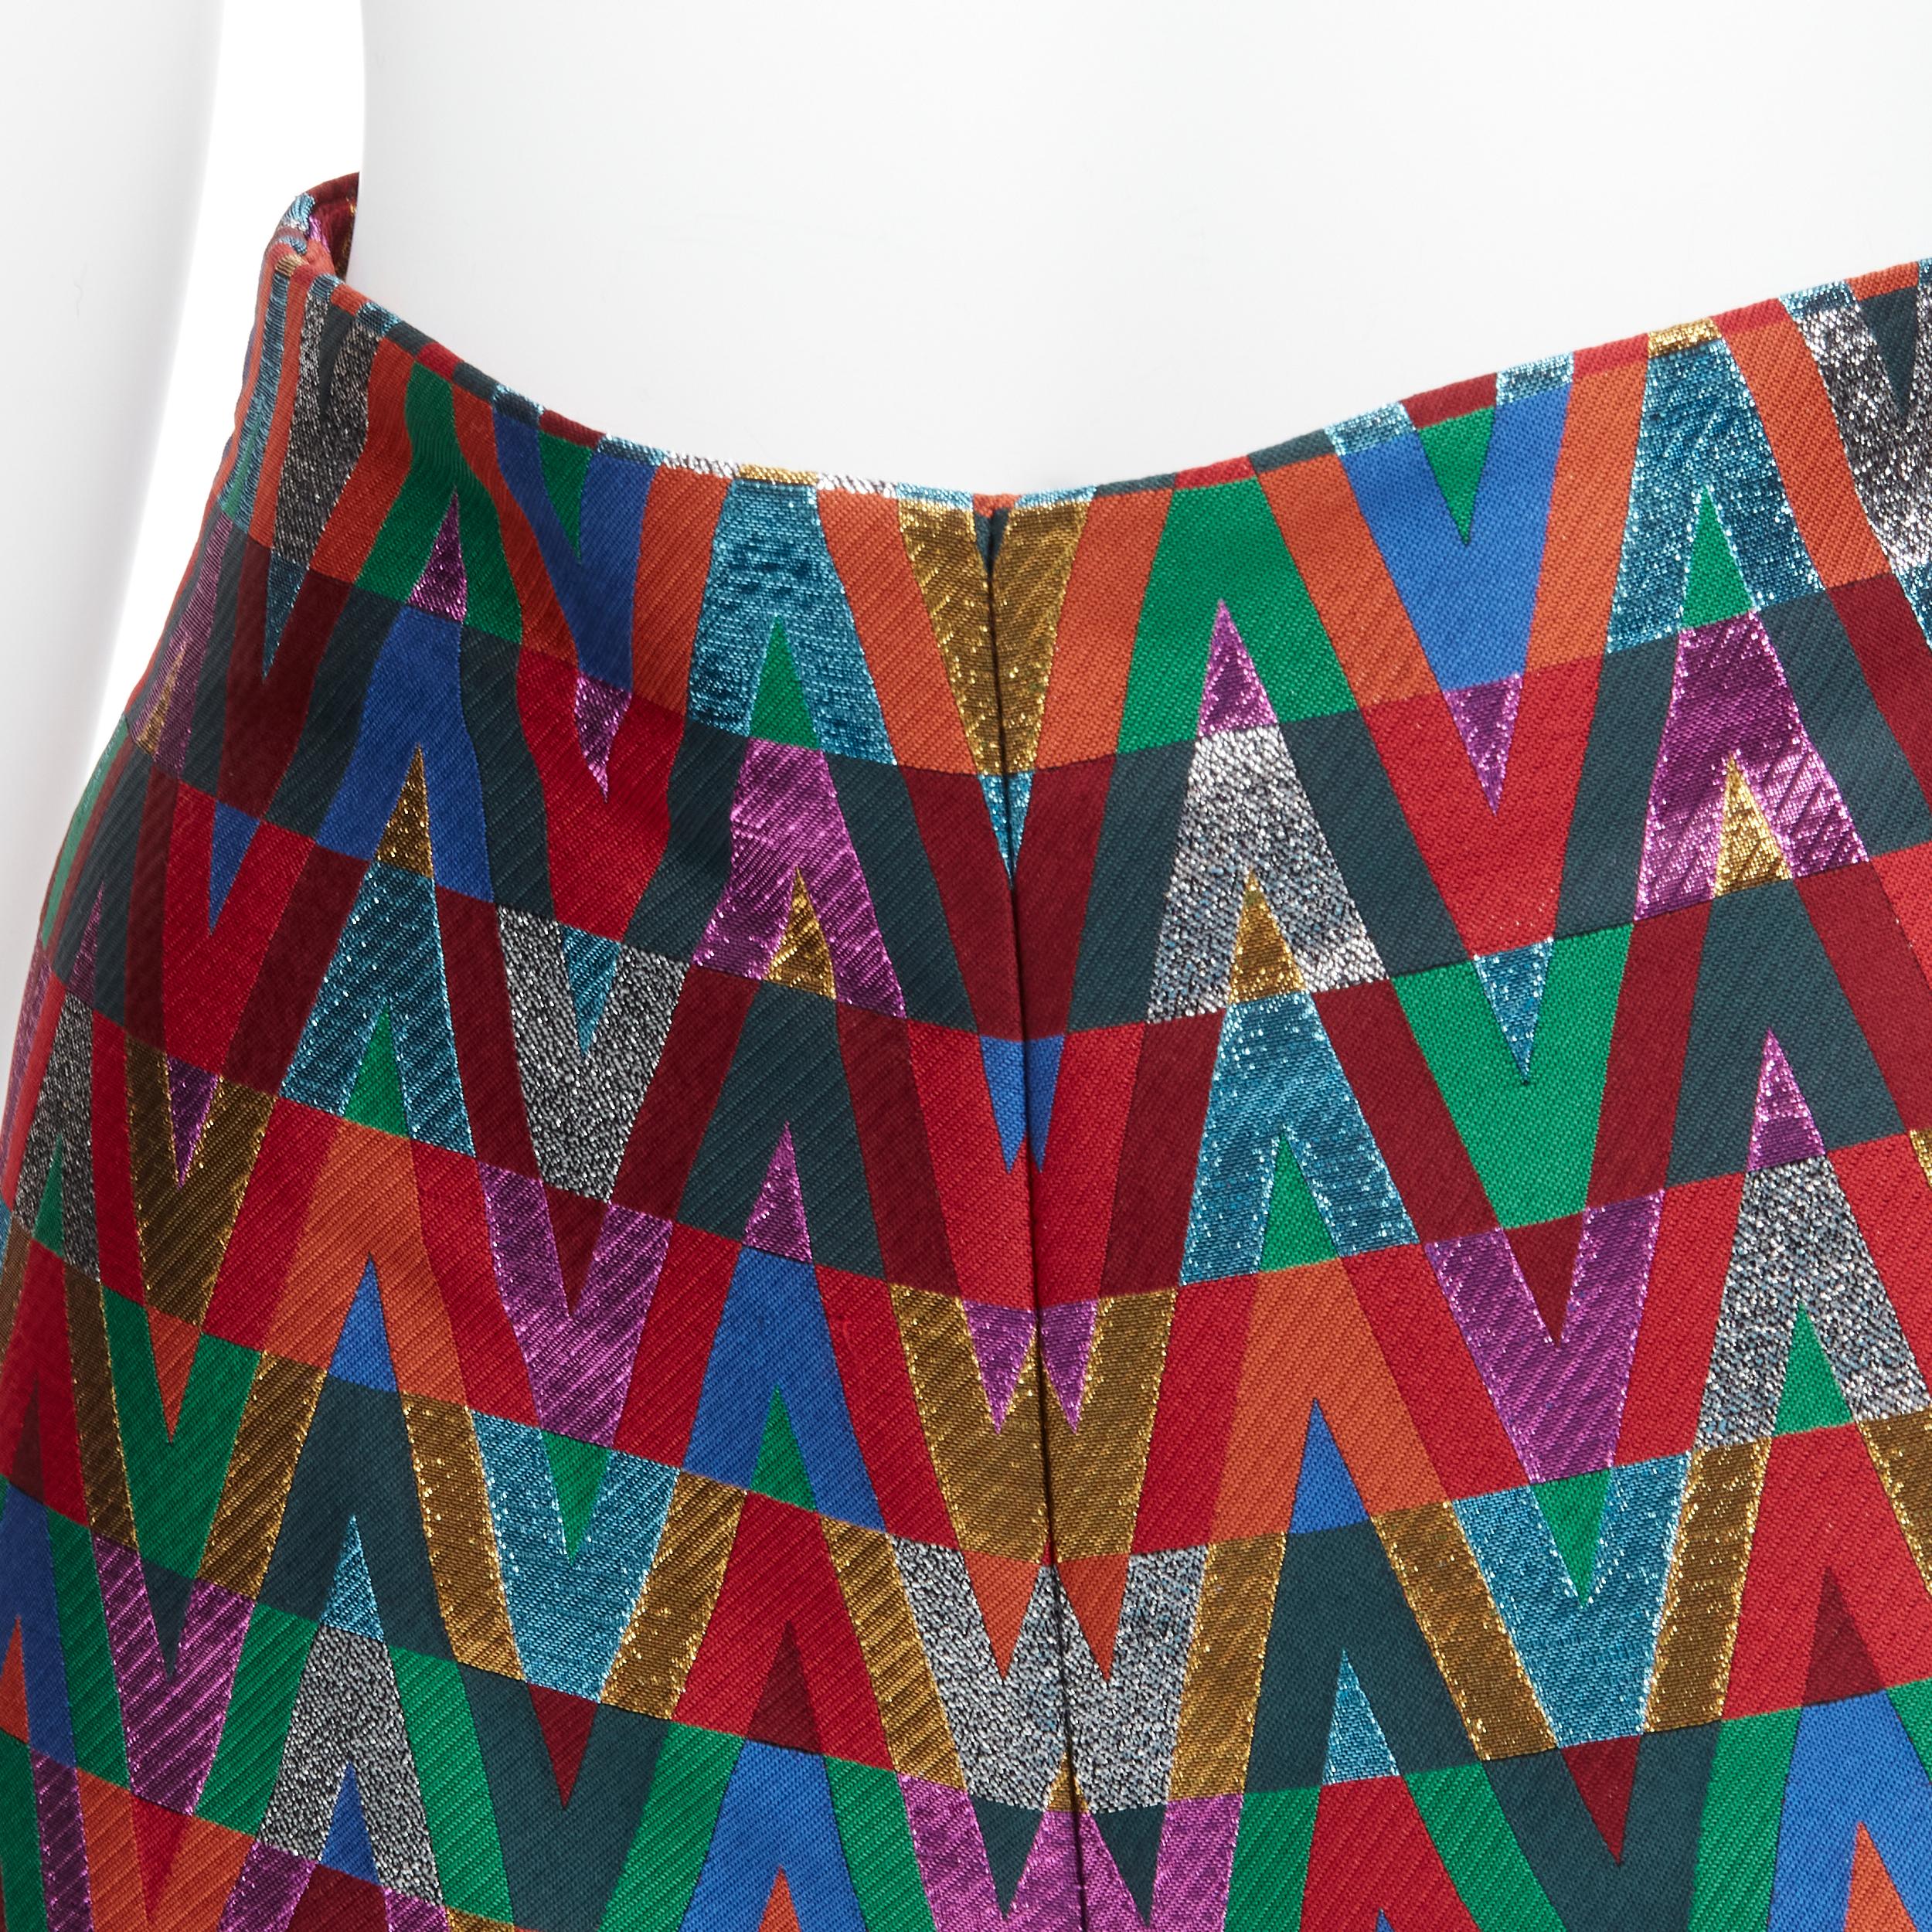 VALENTINO VLOGO Optical colorful graphic logo lurex high waist A-line shorts IT38 XS
Reference: AAWC/A00493
Brand: Valentino
Collection: VLOGO Optical
Material: Polyester, Silk, Blend
Color: Multicolour
Pattern: Abstract
Closure: Zip
Lining: Pink